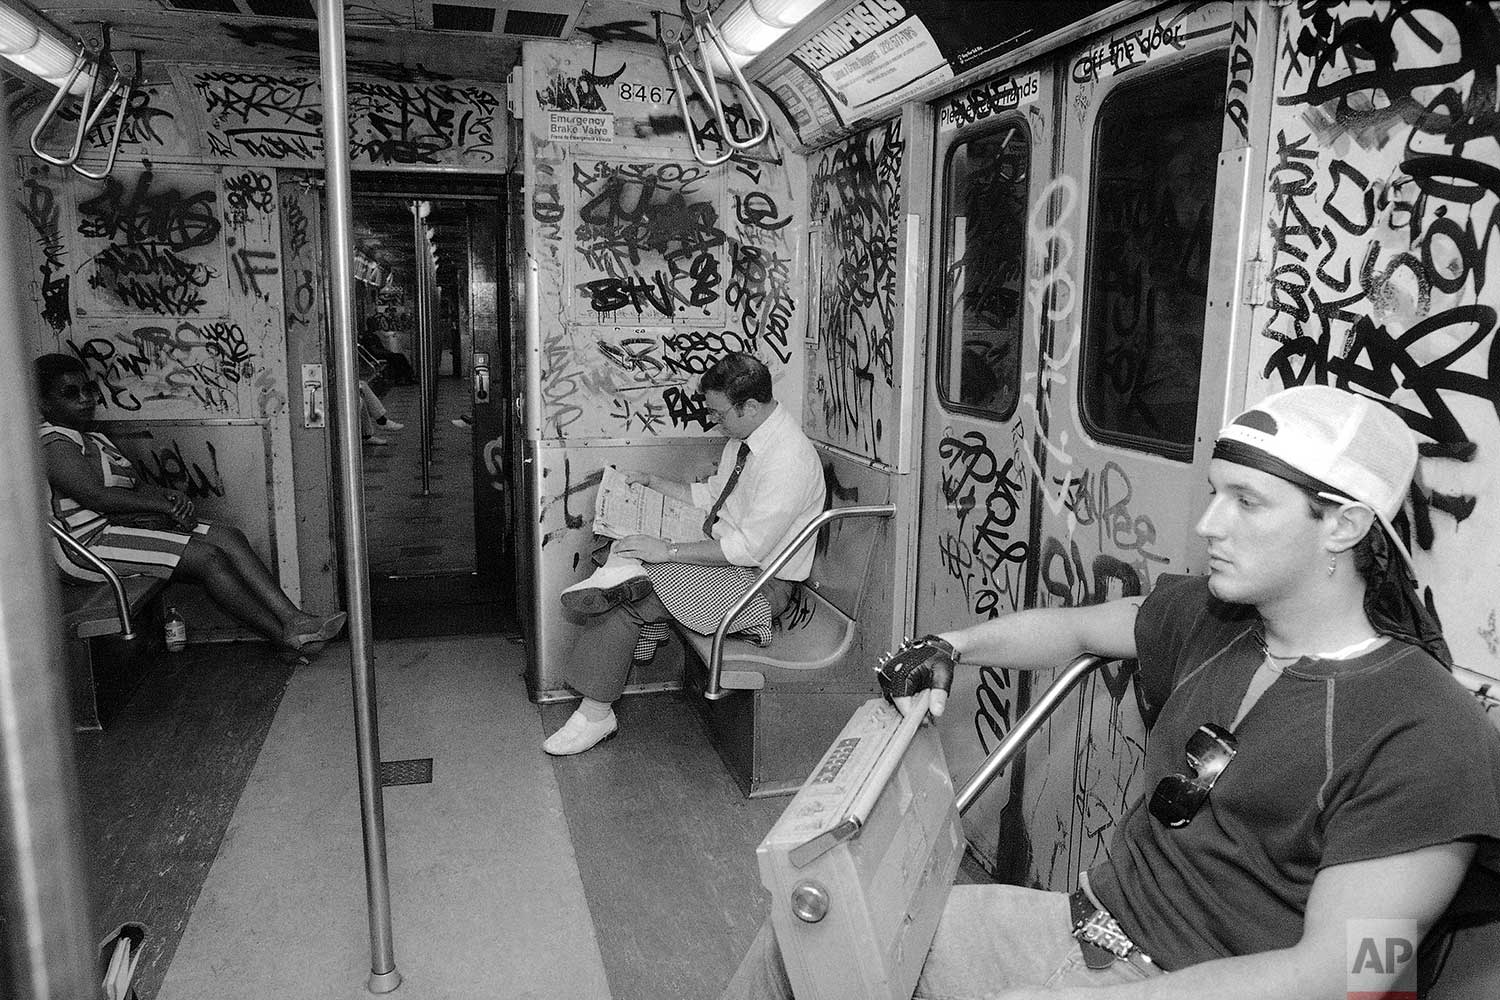  New York City Transit Police Officer Jeremiah Lyons, center, as a decoy cop reads his newspaper on board the city subway while he carries on his act as a fare-paying passenger wearing visible gold jewelry on July 25, 1985. His backup Police Officer 